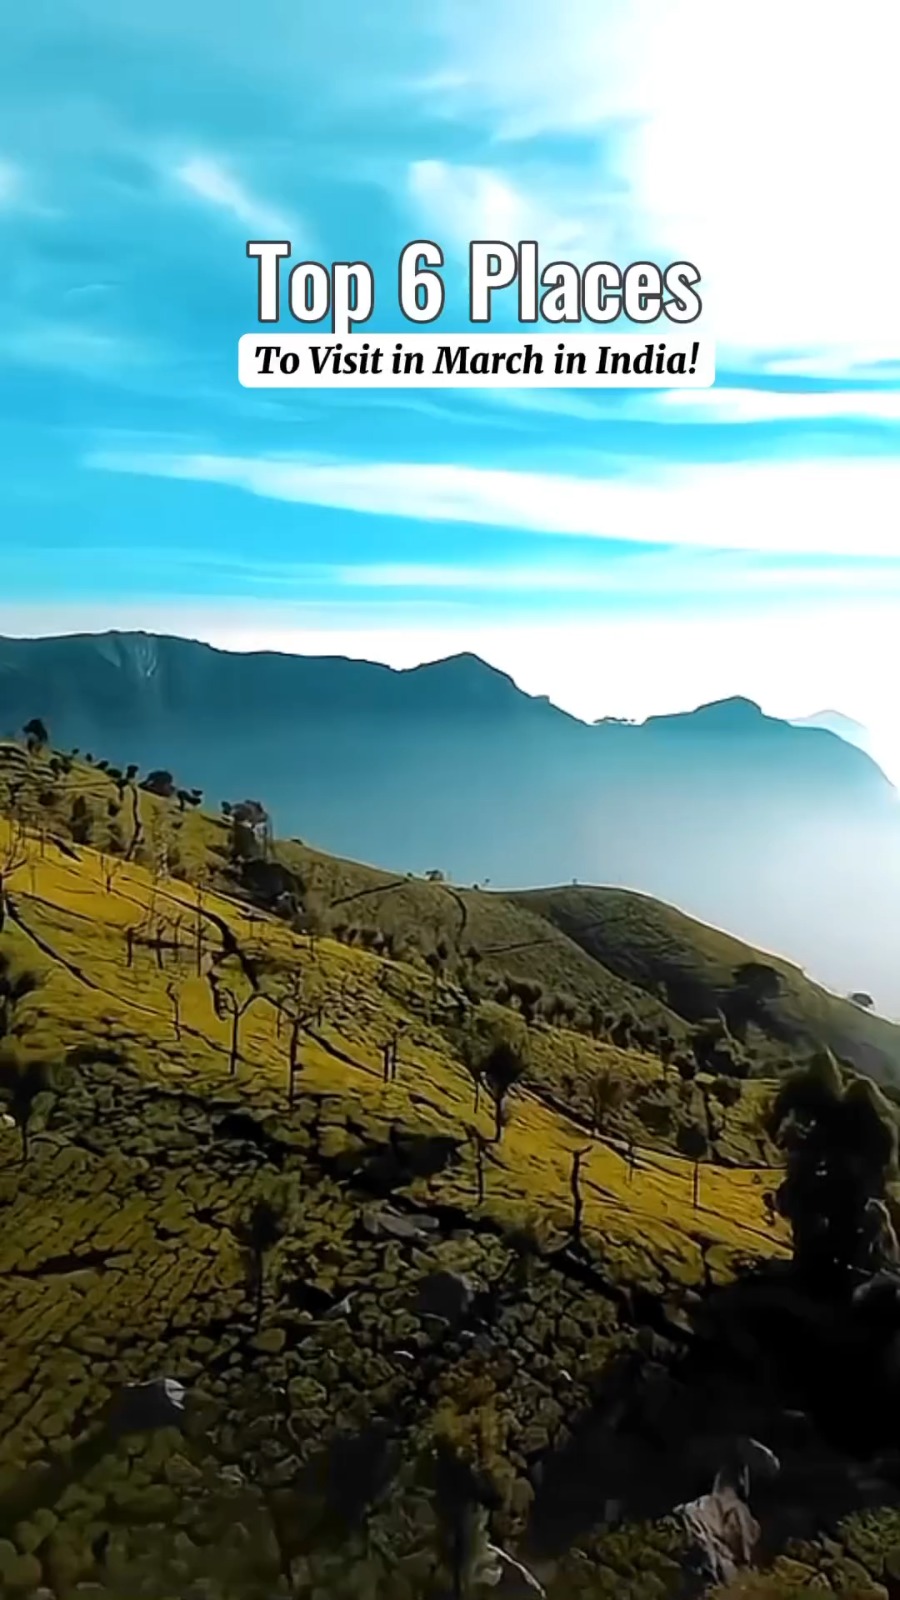 📍Top 6 places to visit in March in India! .